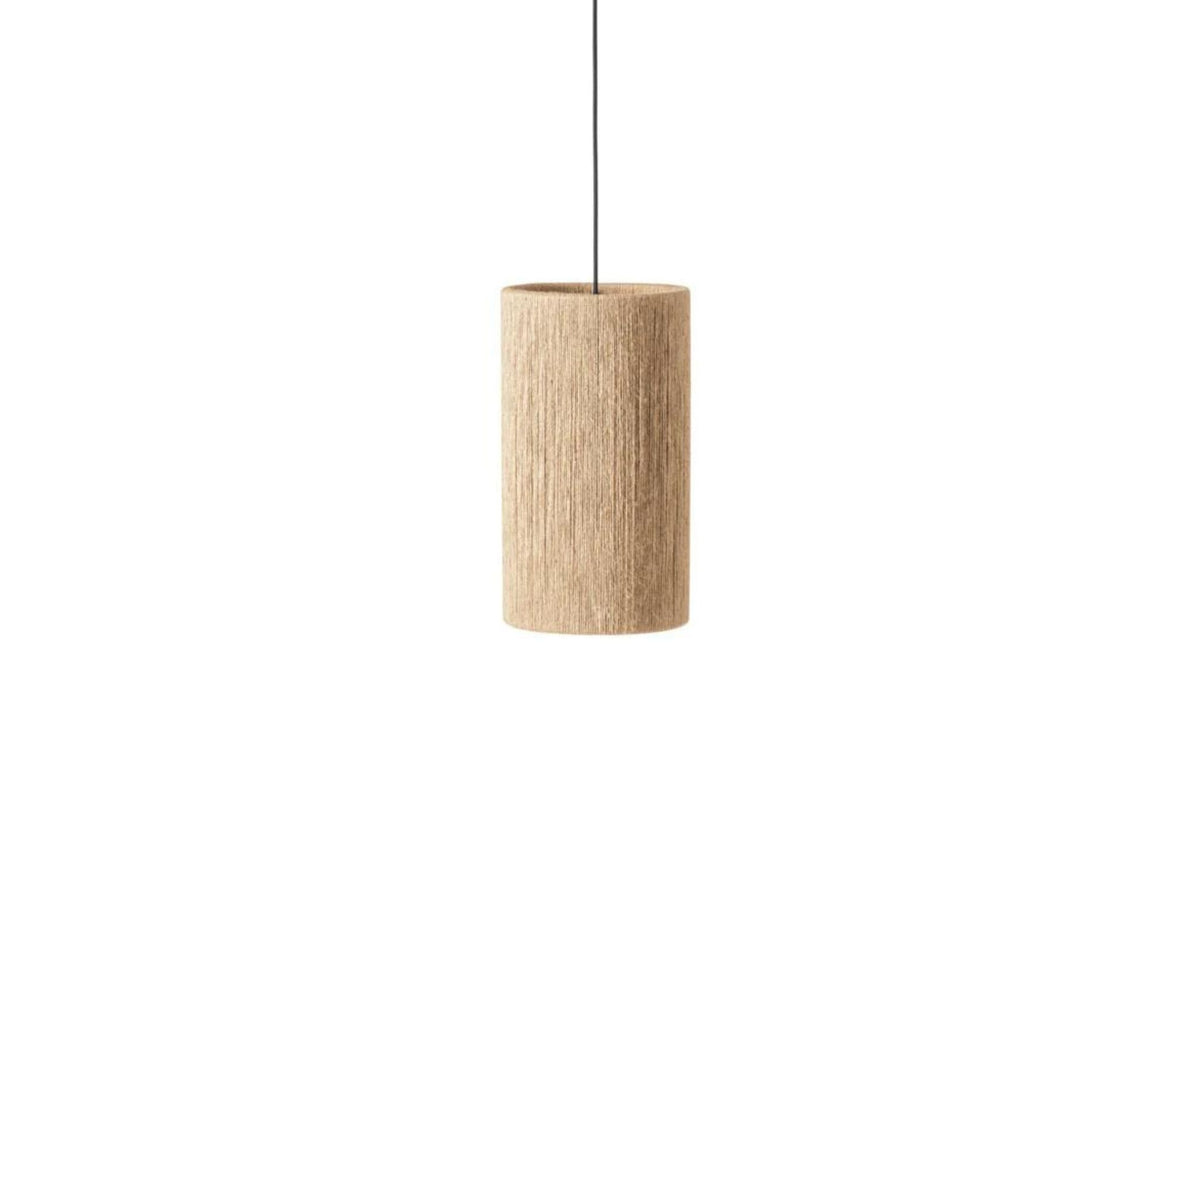 Made by Hand RO High Pendant Lamp 23 by Kim Richardt